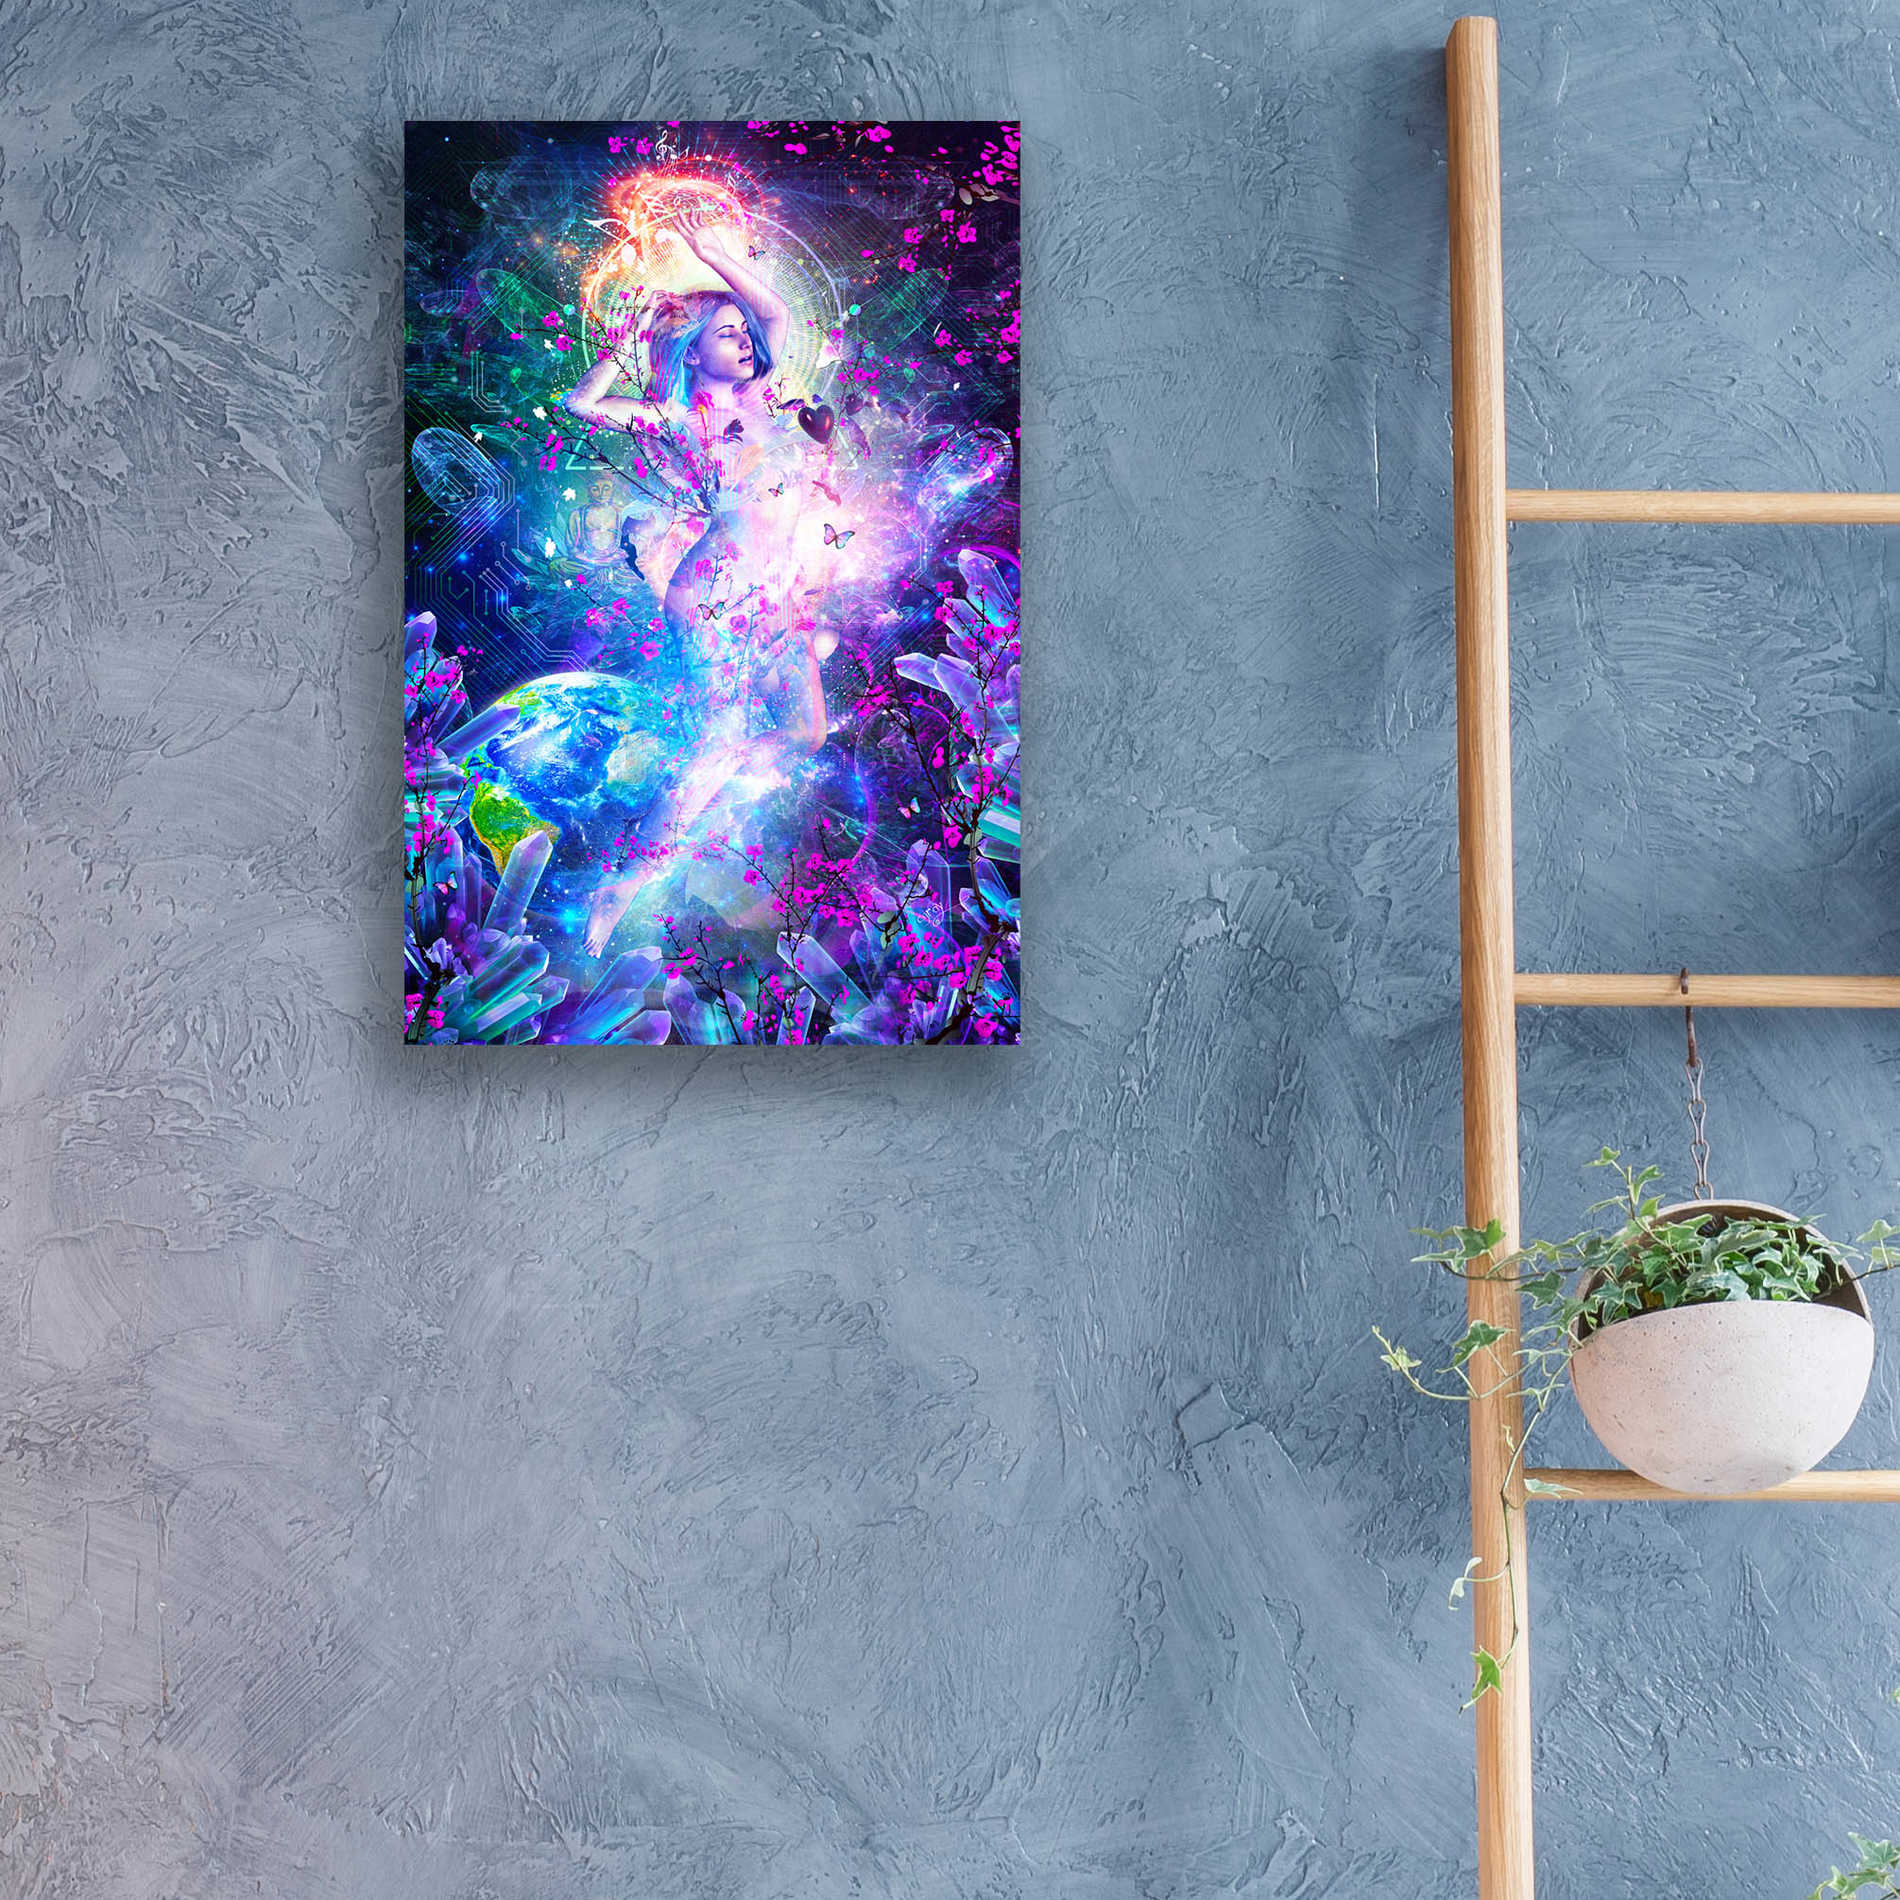 Epic Art 'Encounter With The Sublime' by Cameron Gray, Acrylic Glass Wall Art,16x24